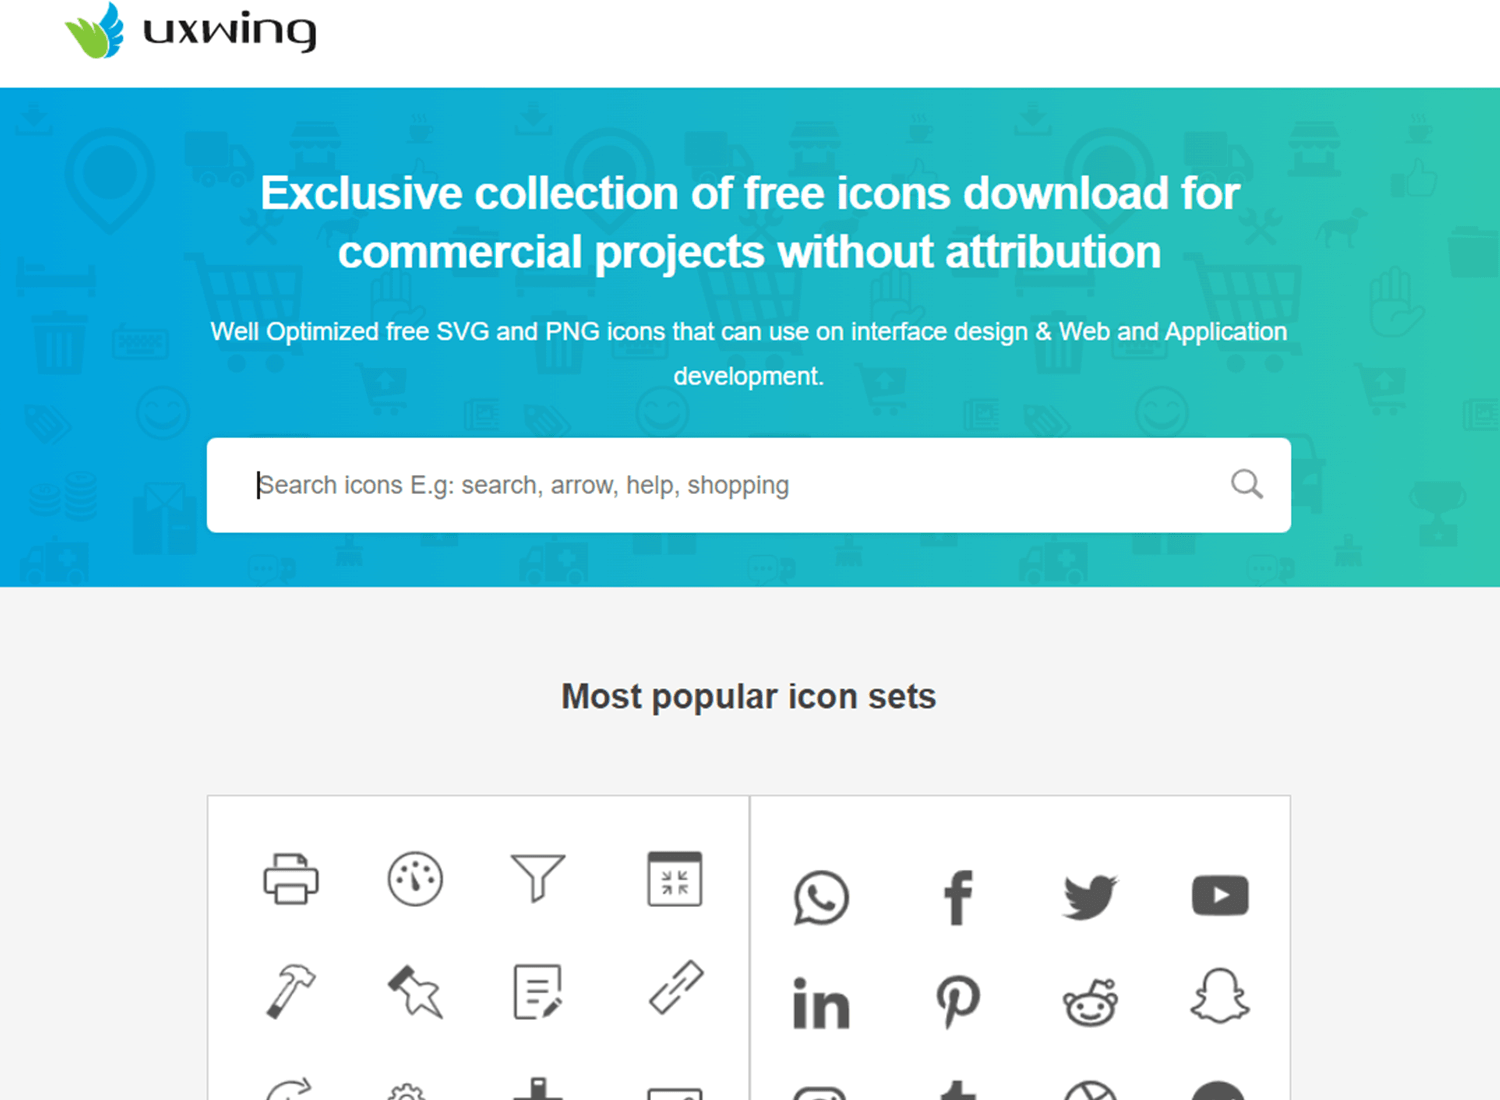 ux wing as website for free icons